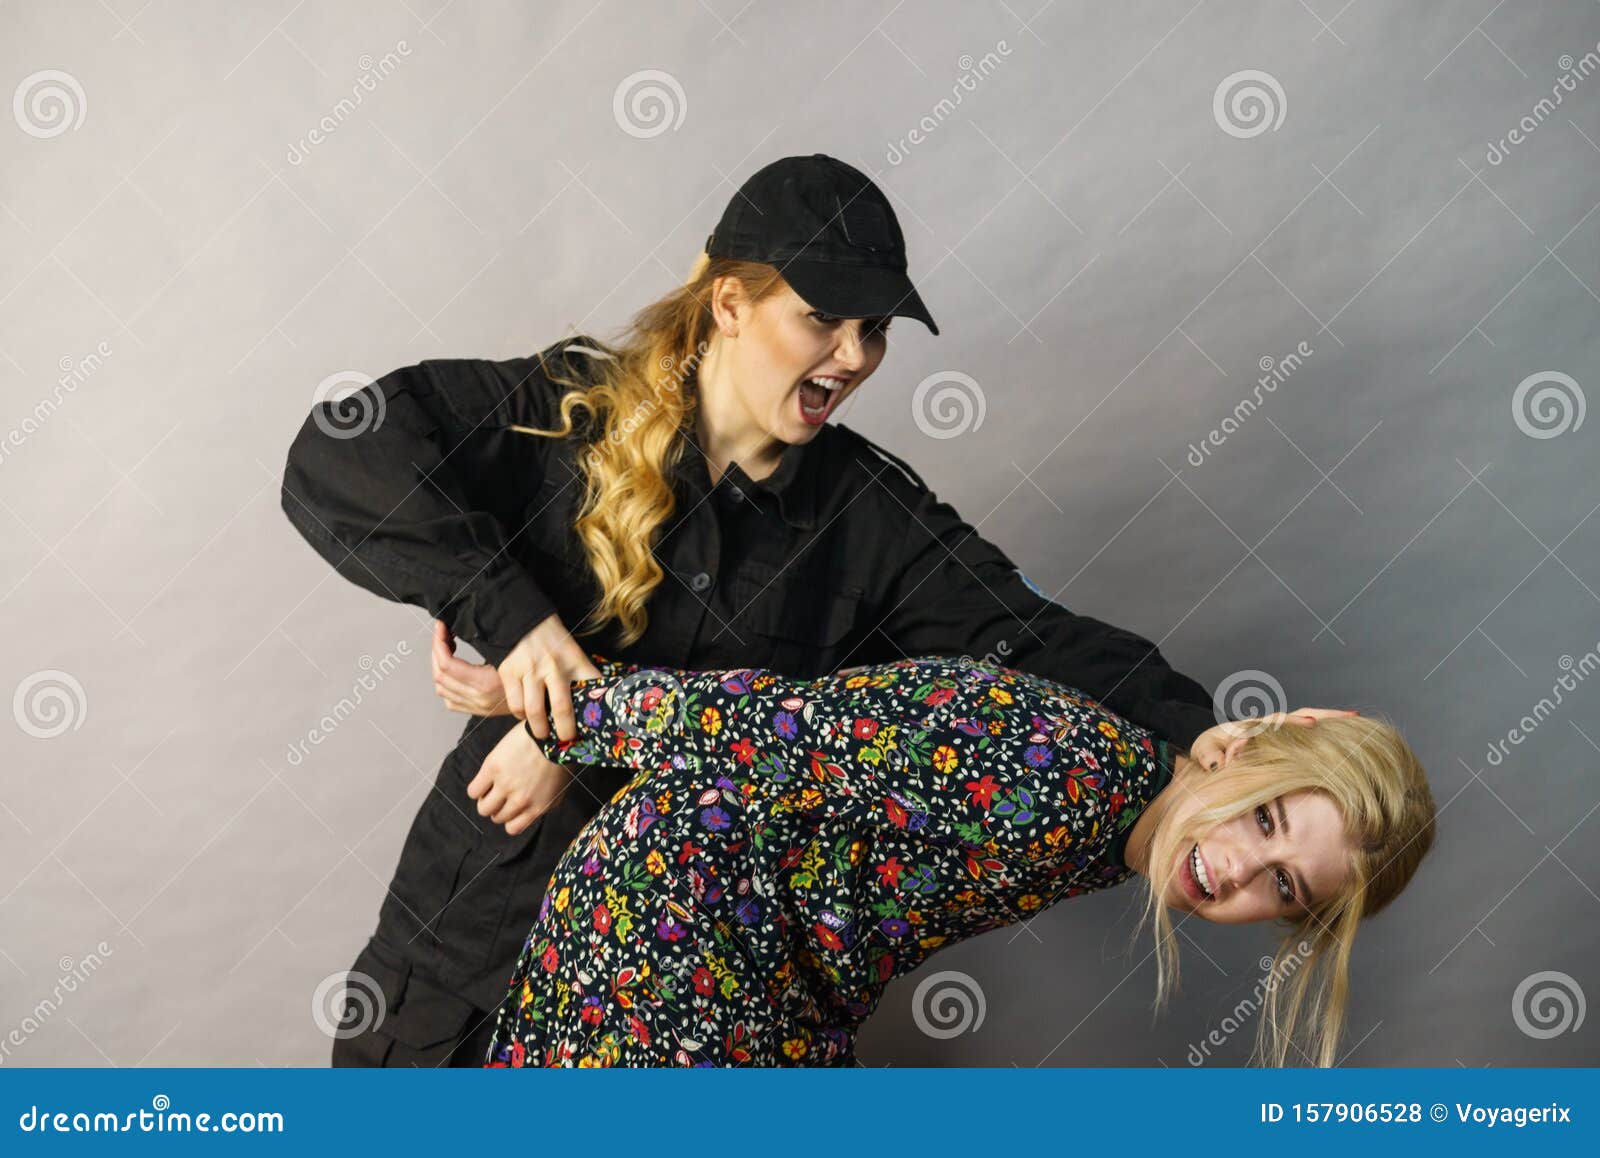 Security Guard And Shoplifter Stock Photo Image Of Shopllifte